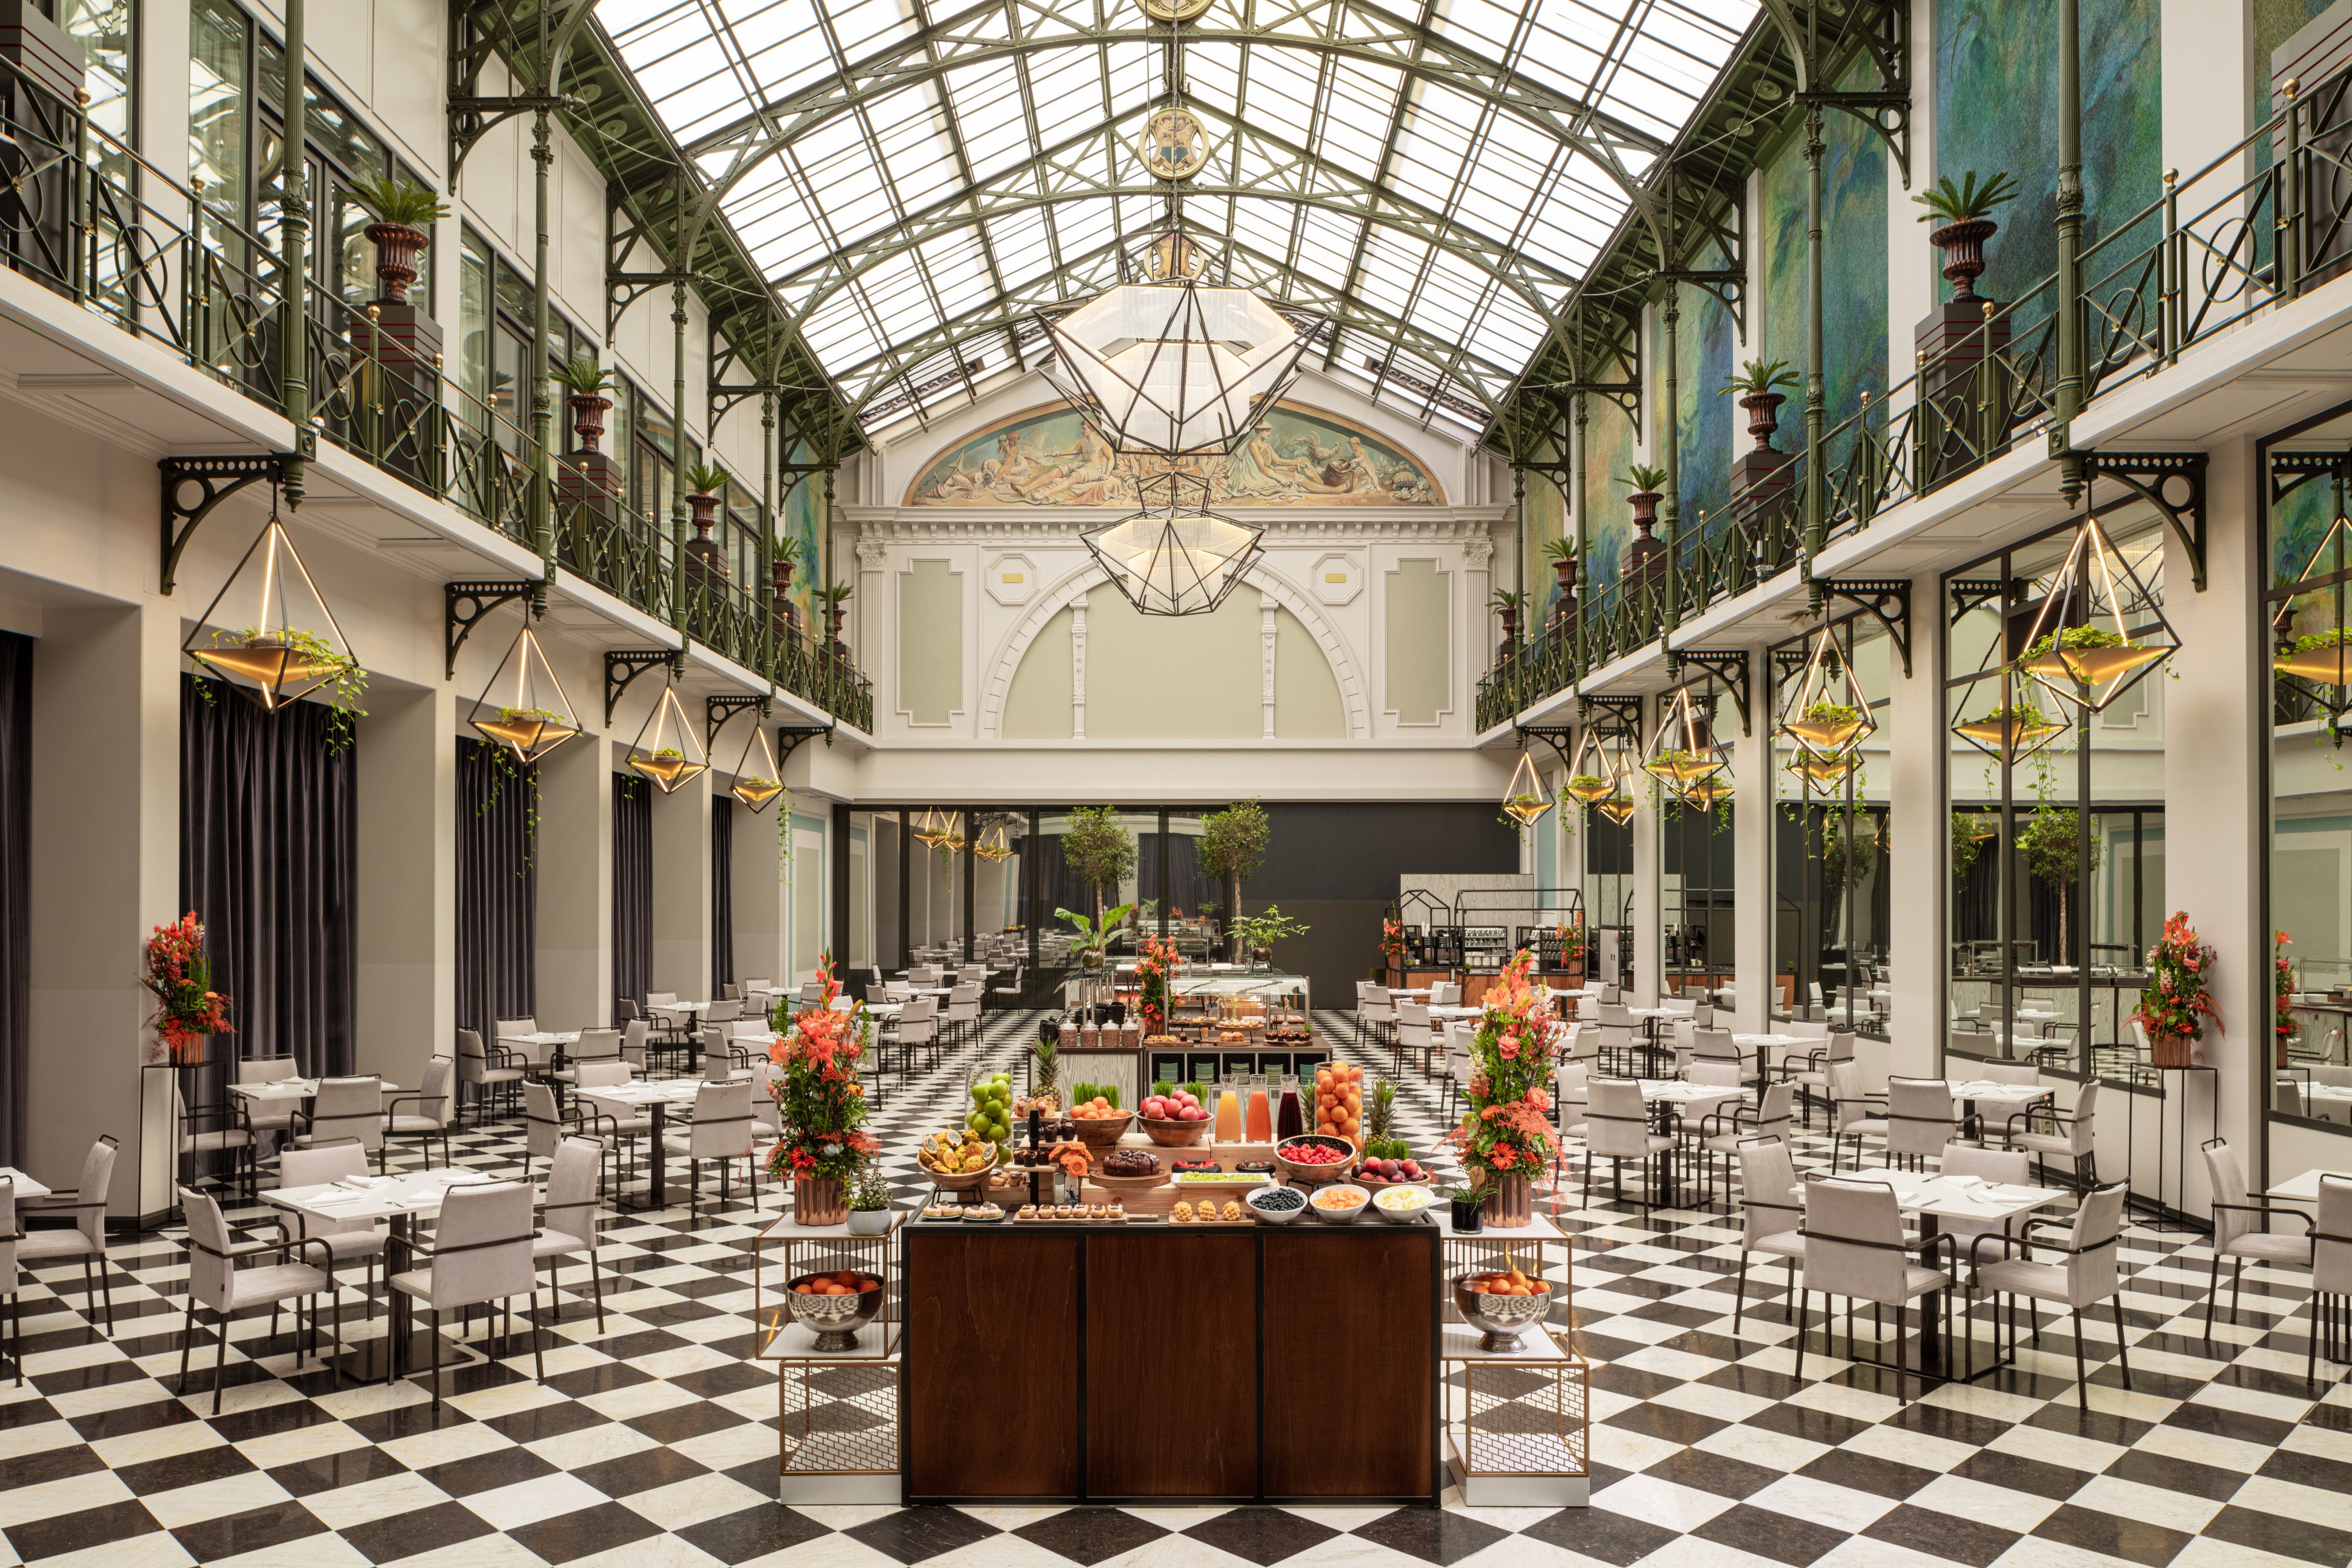 The breakfast buffet in the Wintergarten at the Anantara Grand Hotel Krasnapolsky, Amsterdam. Photo: NH Hotel Group.